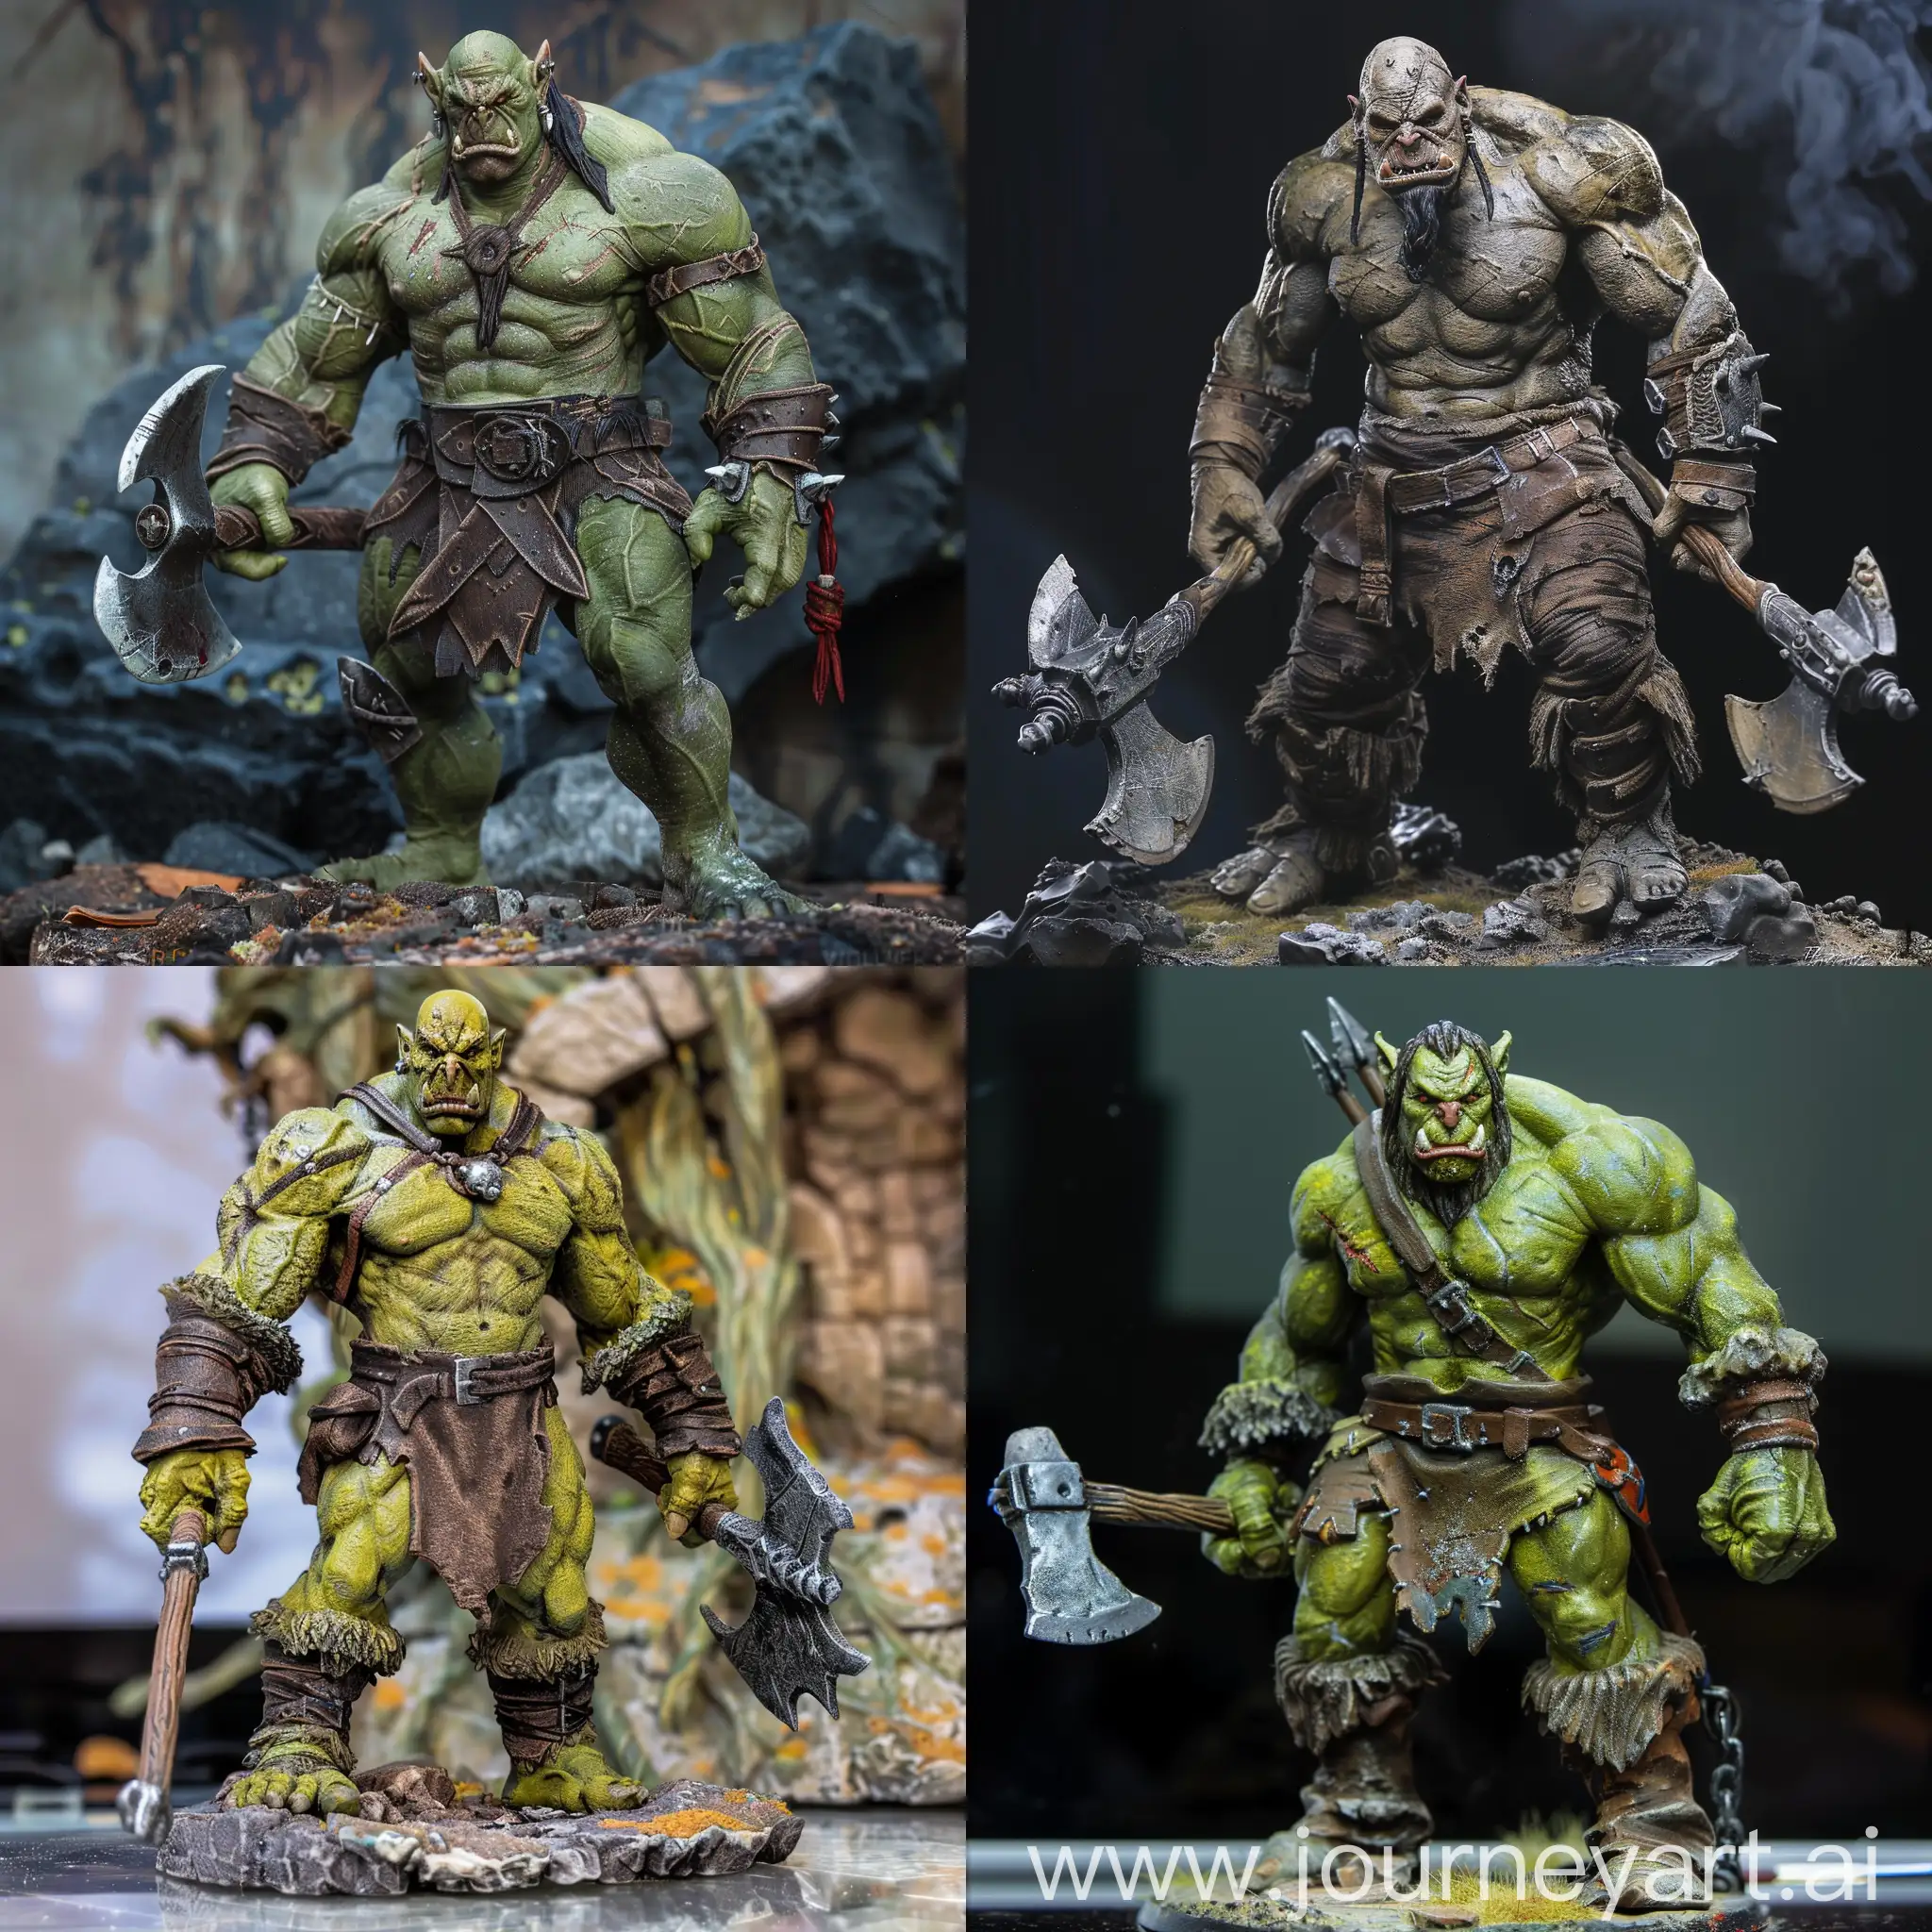 Formidable-Orc-Warrior-with-Dual-Axes